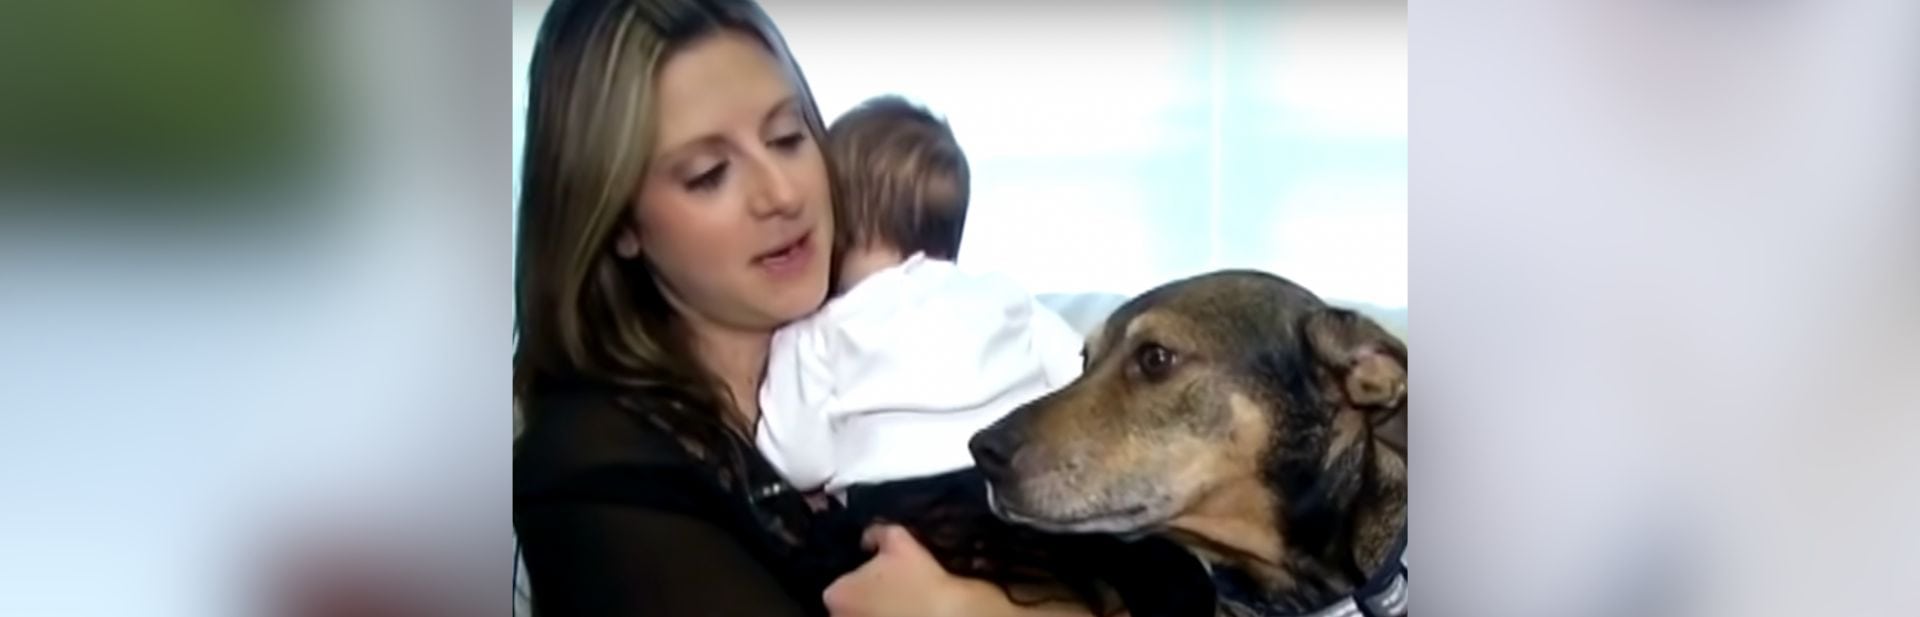 Rescued Dog Alerts Sleeping Family to An Urgent Crisis and Becomes an Overnight Hero